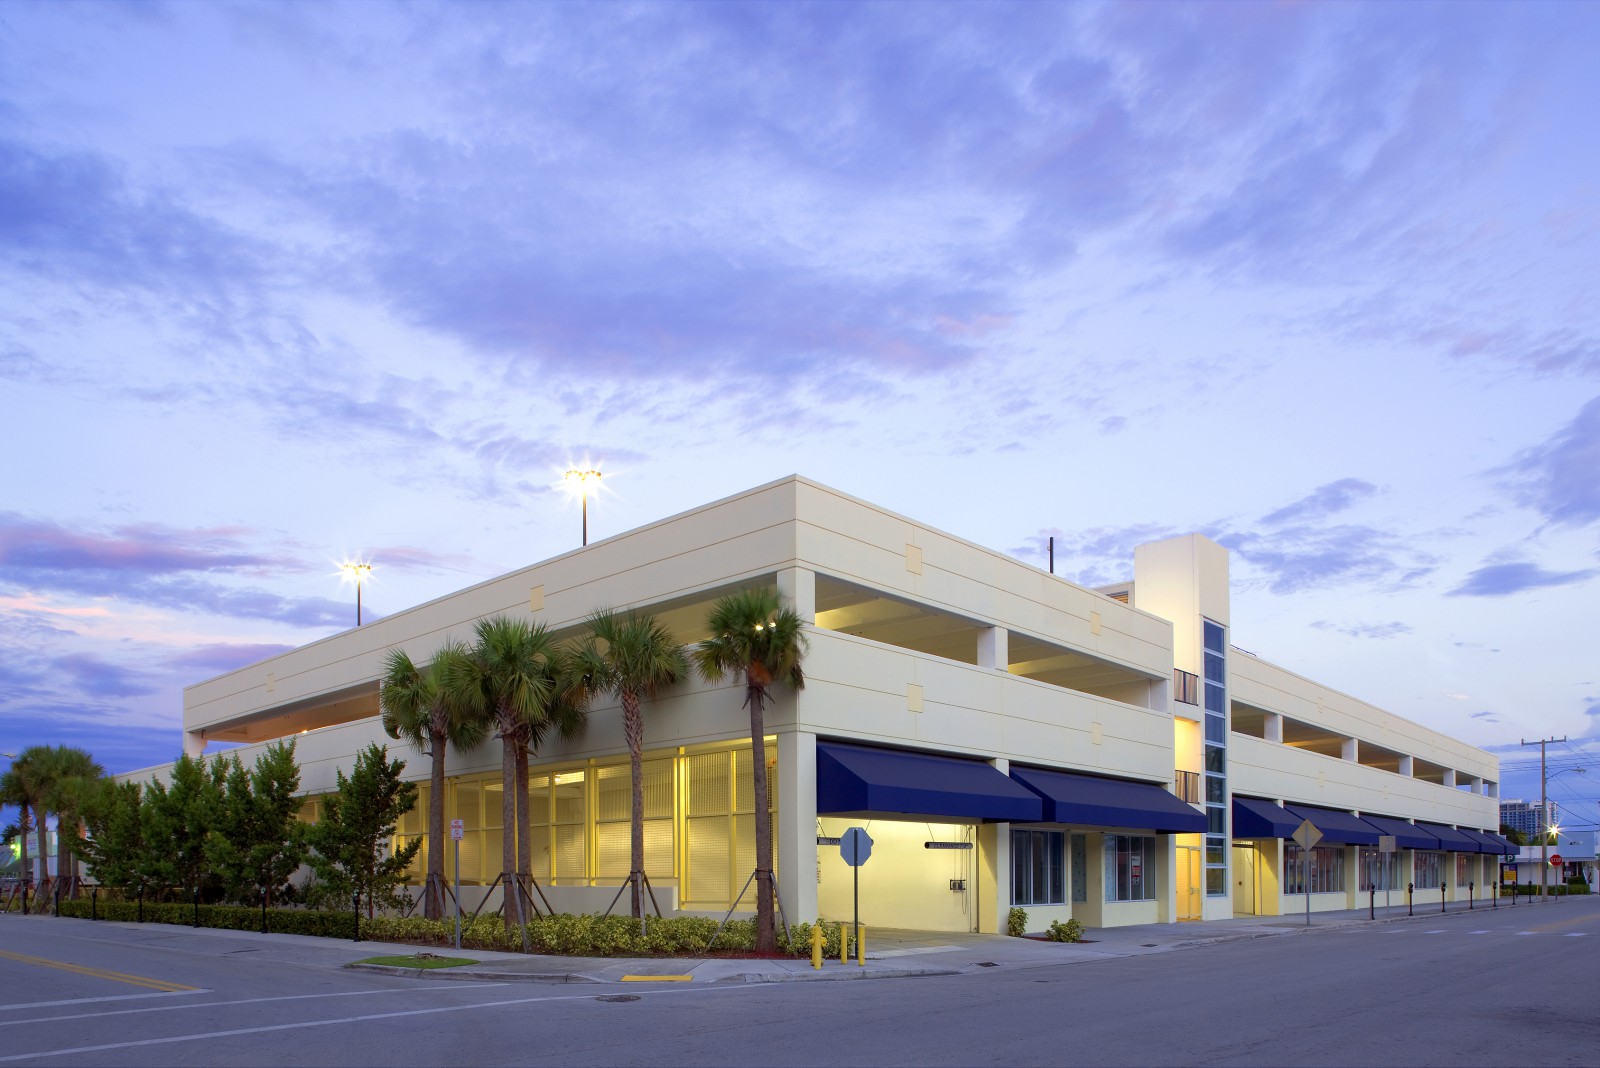 South East - Miami Parking Authority Goodwill Garage